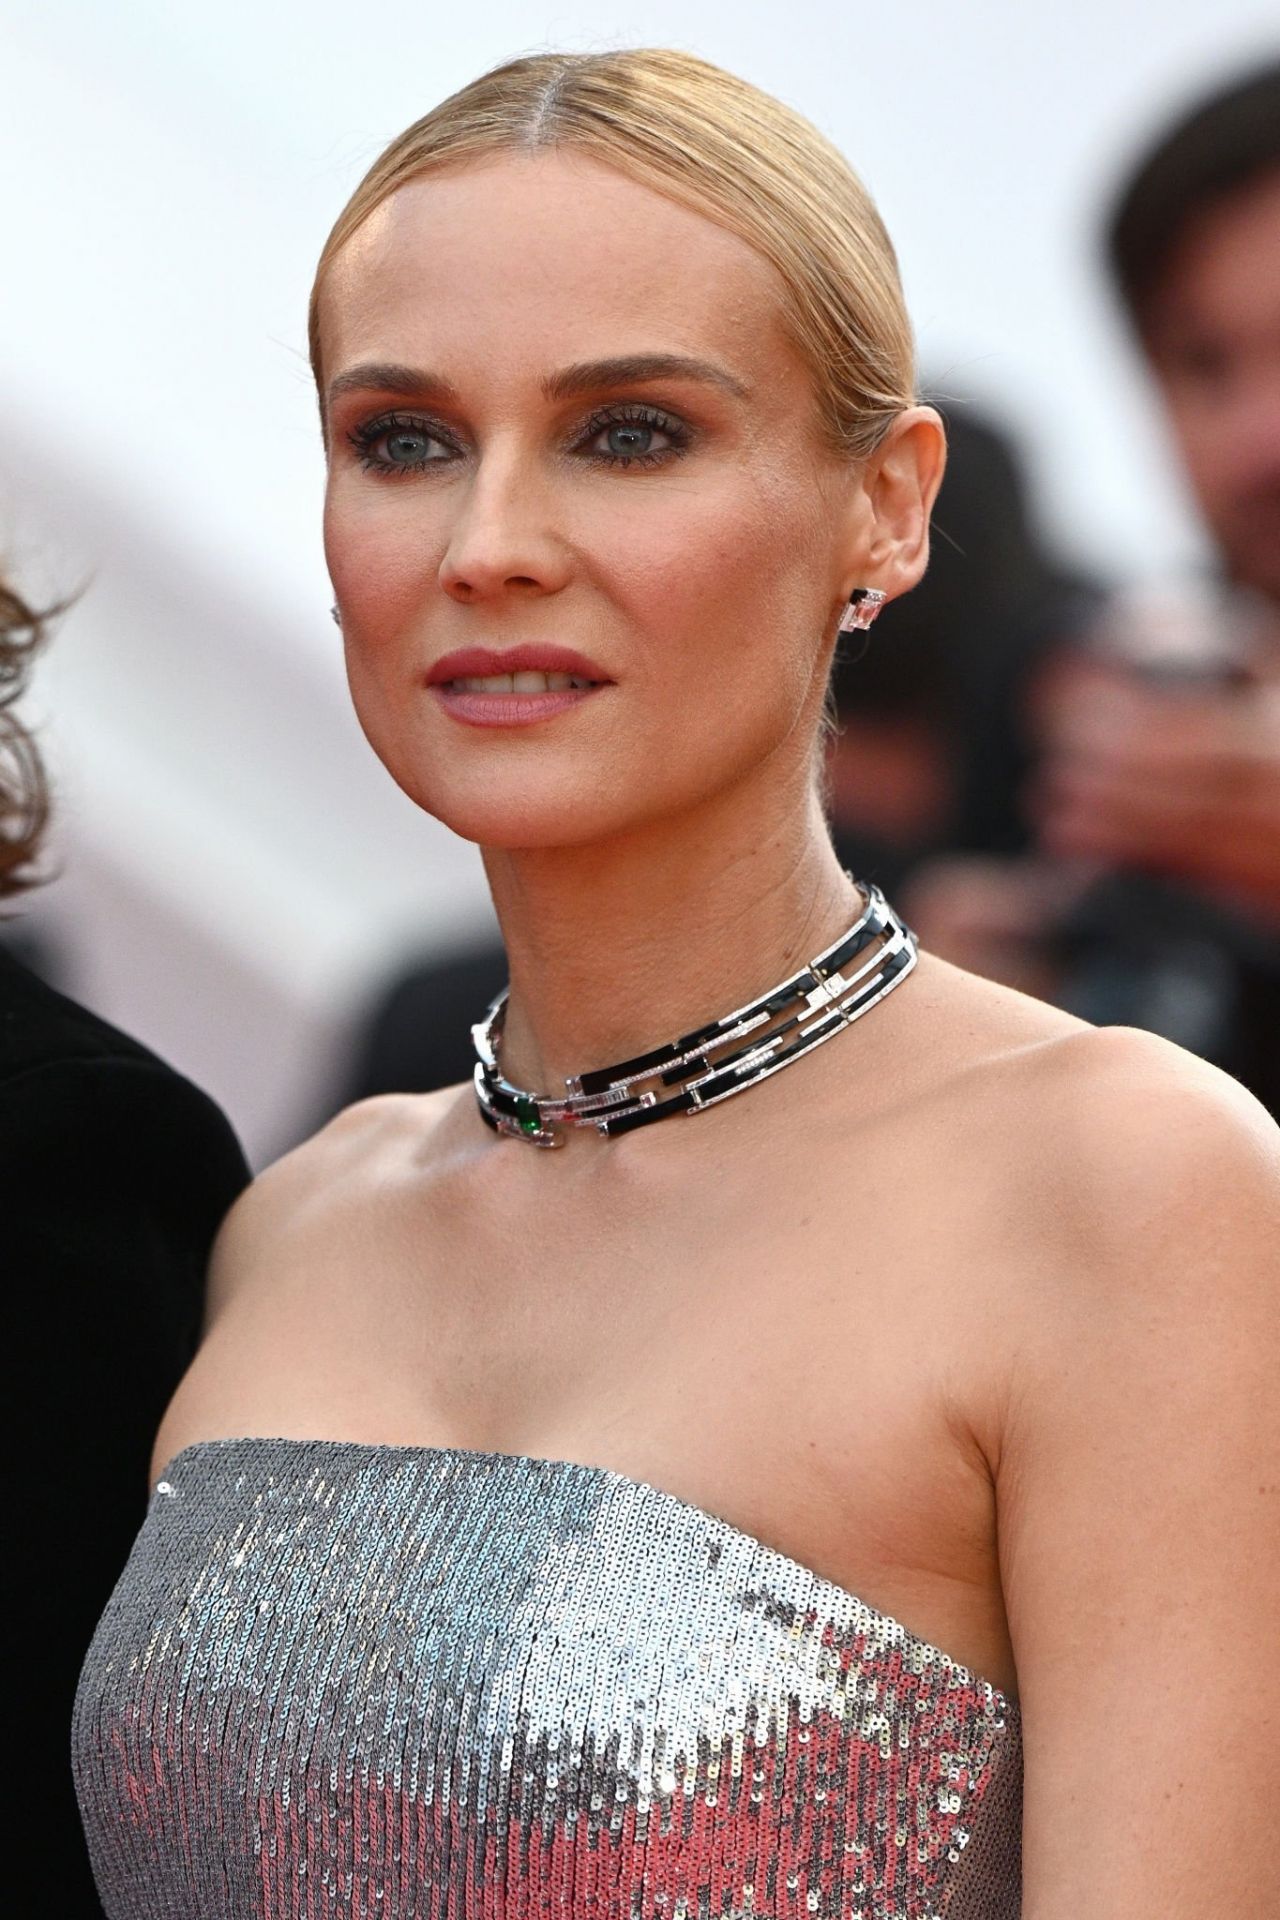 Diane Kruger Shines on Cannes Red Carpet at Closing Ceremony with Norman  Reedus!: Photo 4766564, 2022 Cannes Film Festival, Diane Kruger, Norman  Reedus Photos